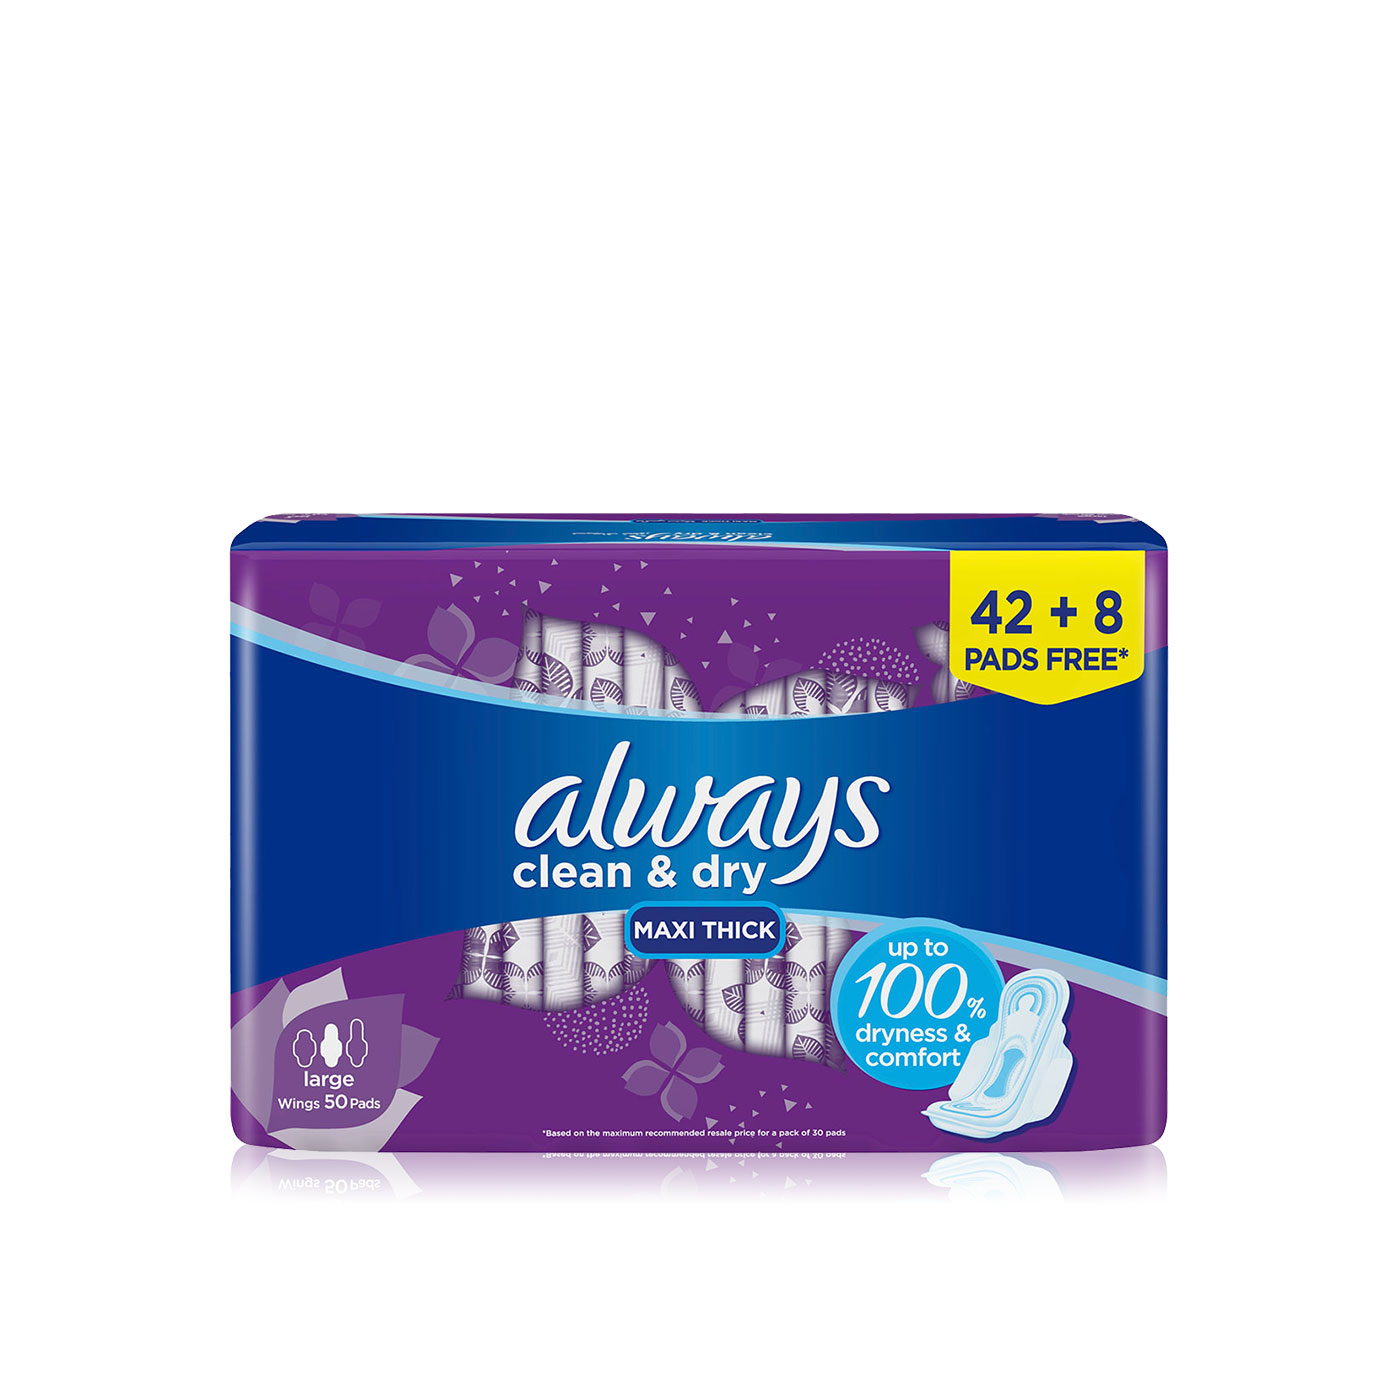 Always cool and dry maxi thick with wings x50 - Spinneys UAE